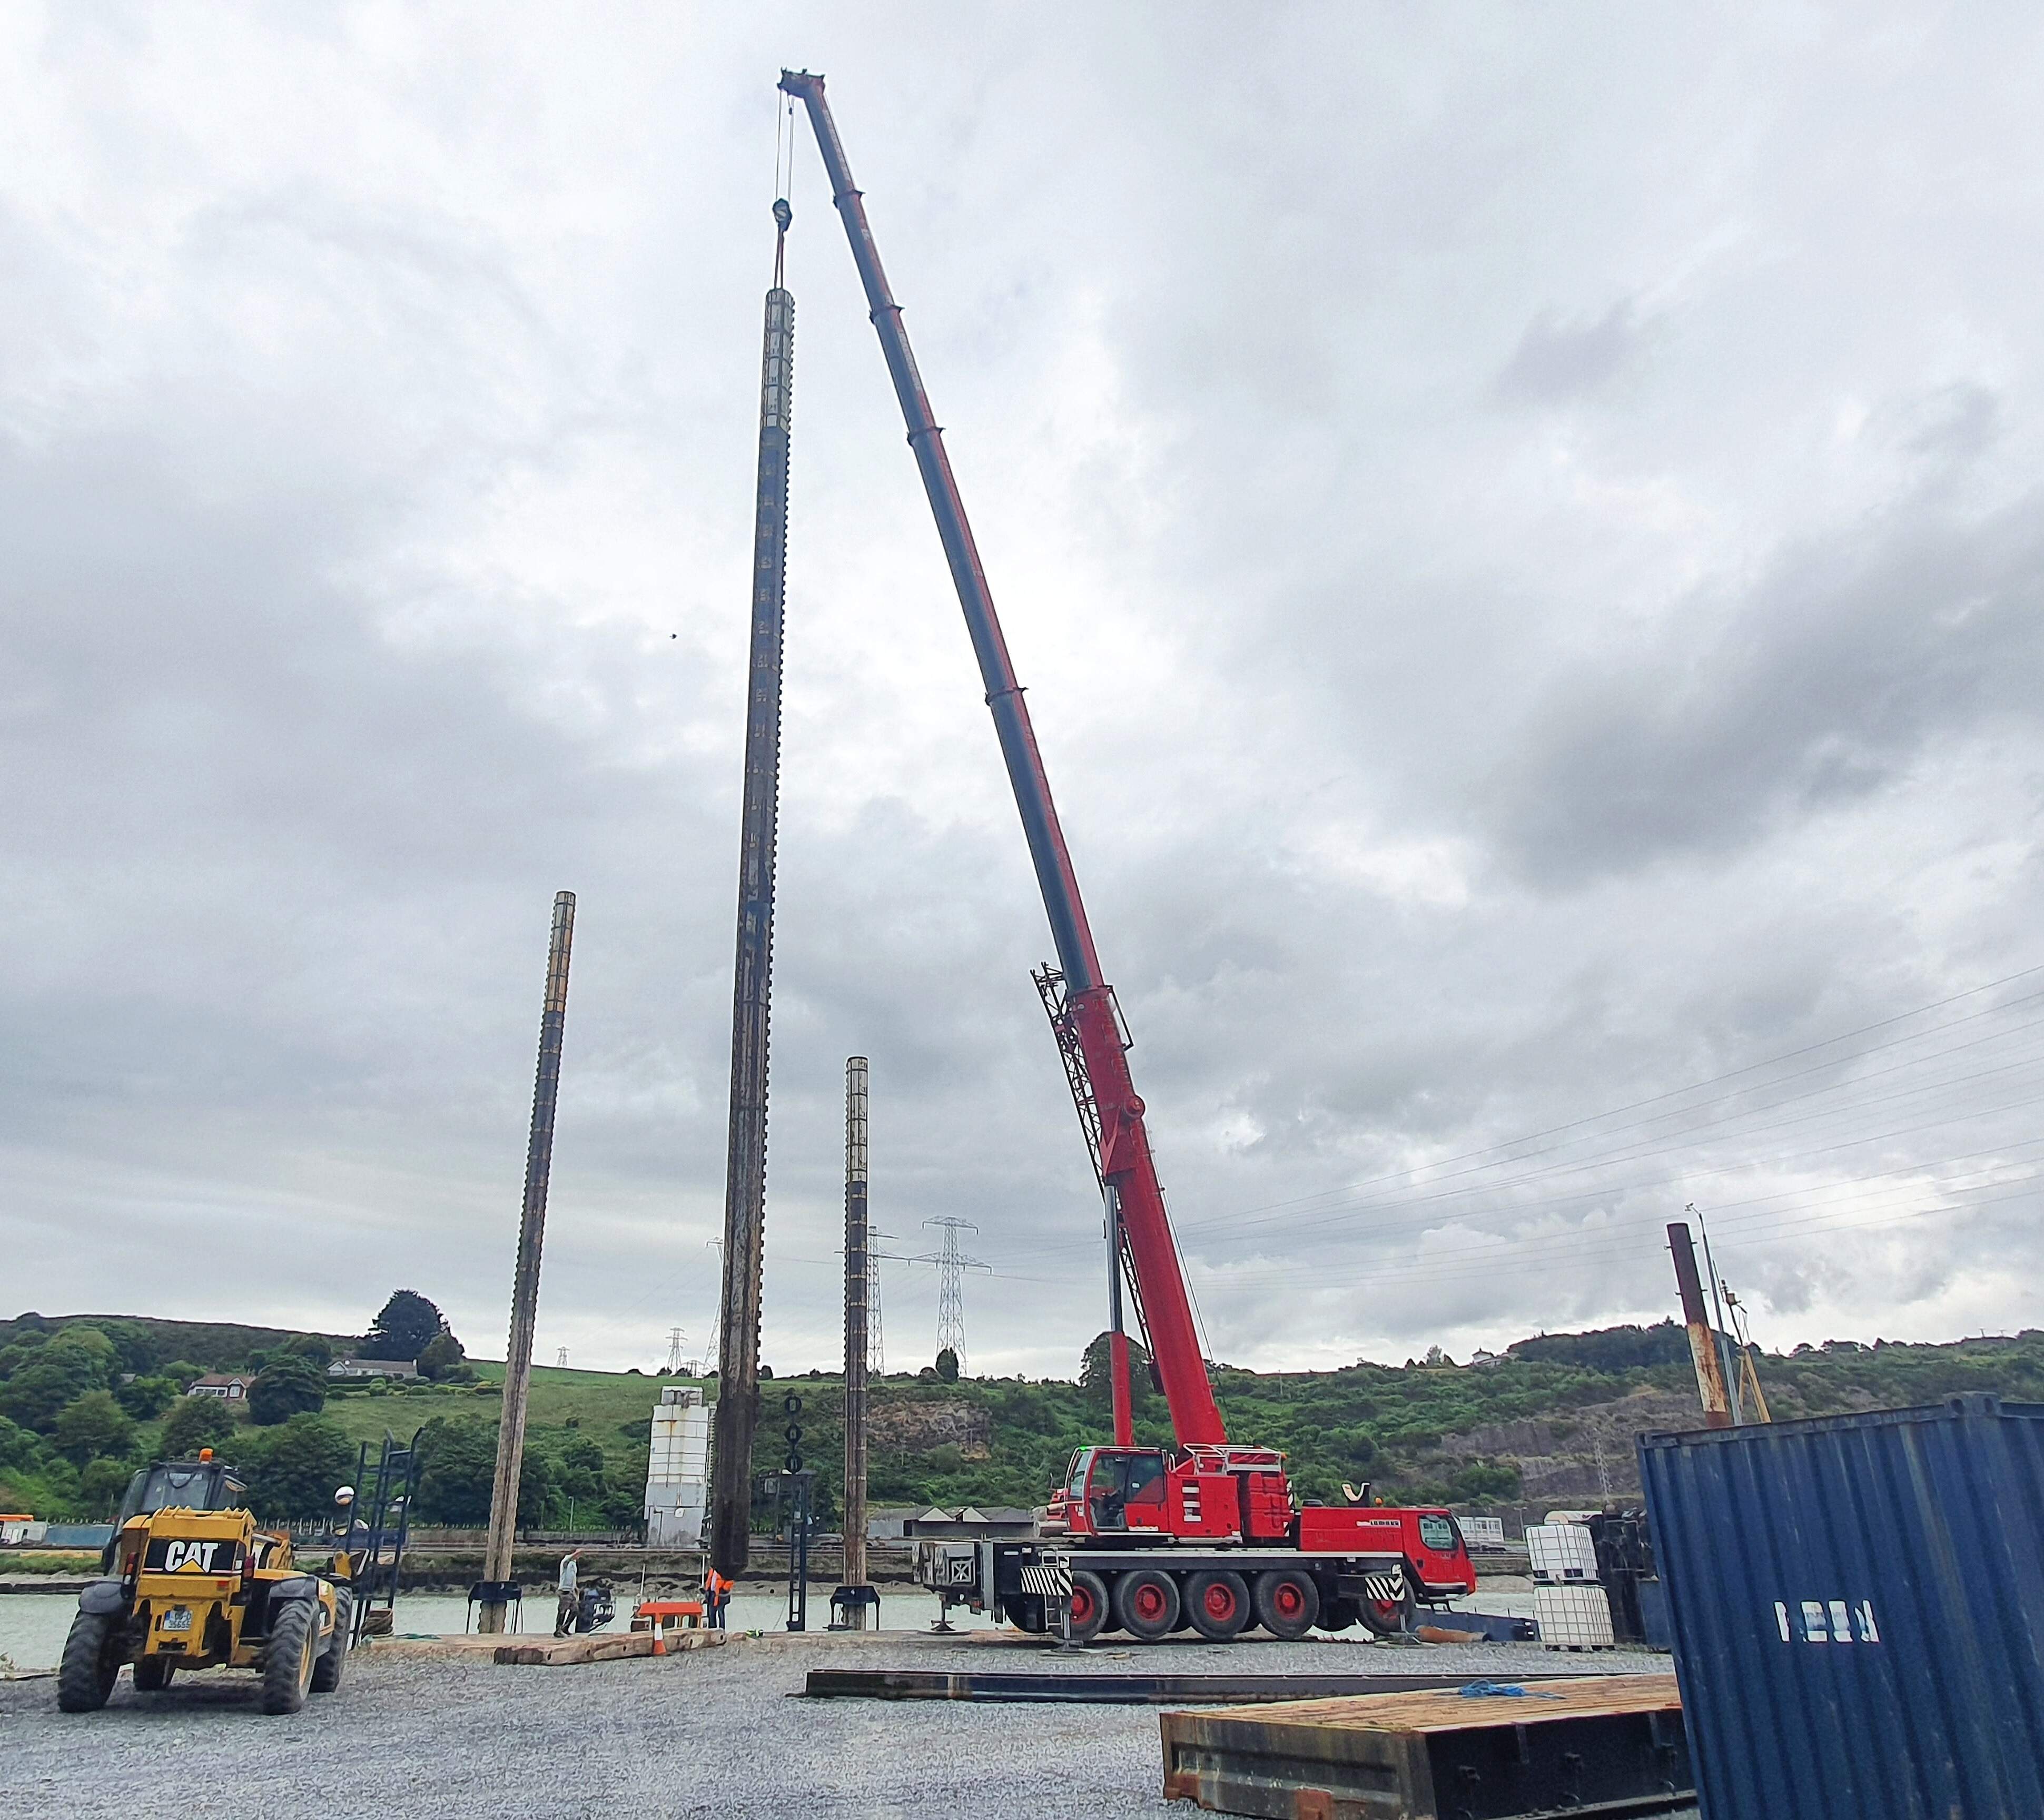 Removing 15 tonne, 33 metre long legs from a jack-up barge in Waterford City